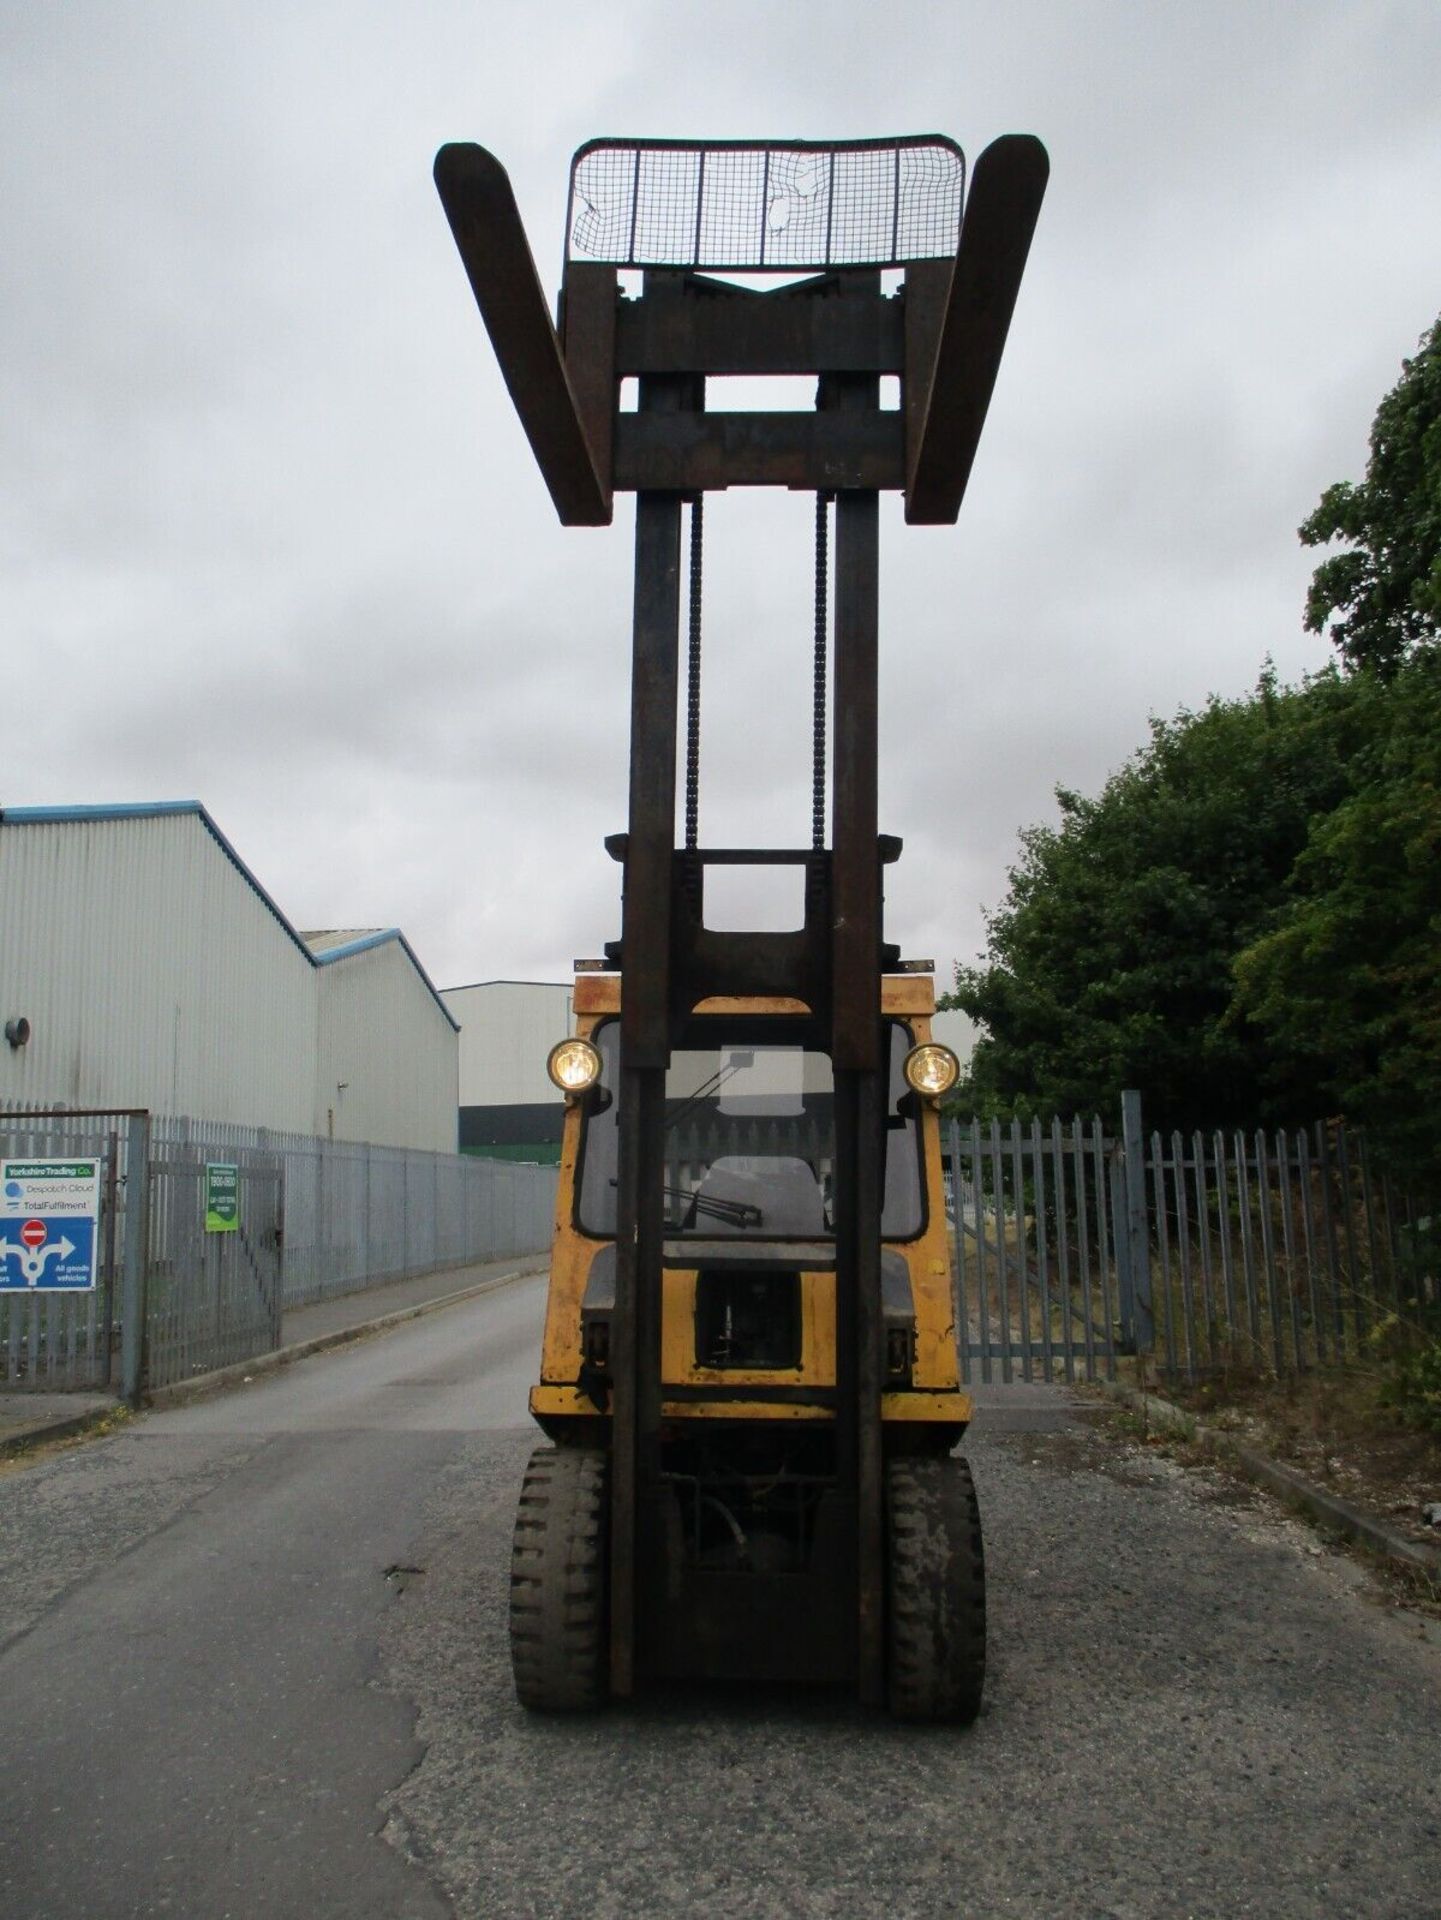 LANSING 7/5.0 POWERHOUSE: 5000KG LIFT WITH LONG TINES - Image 11 of 11